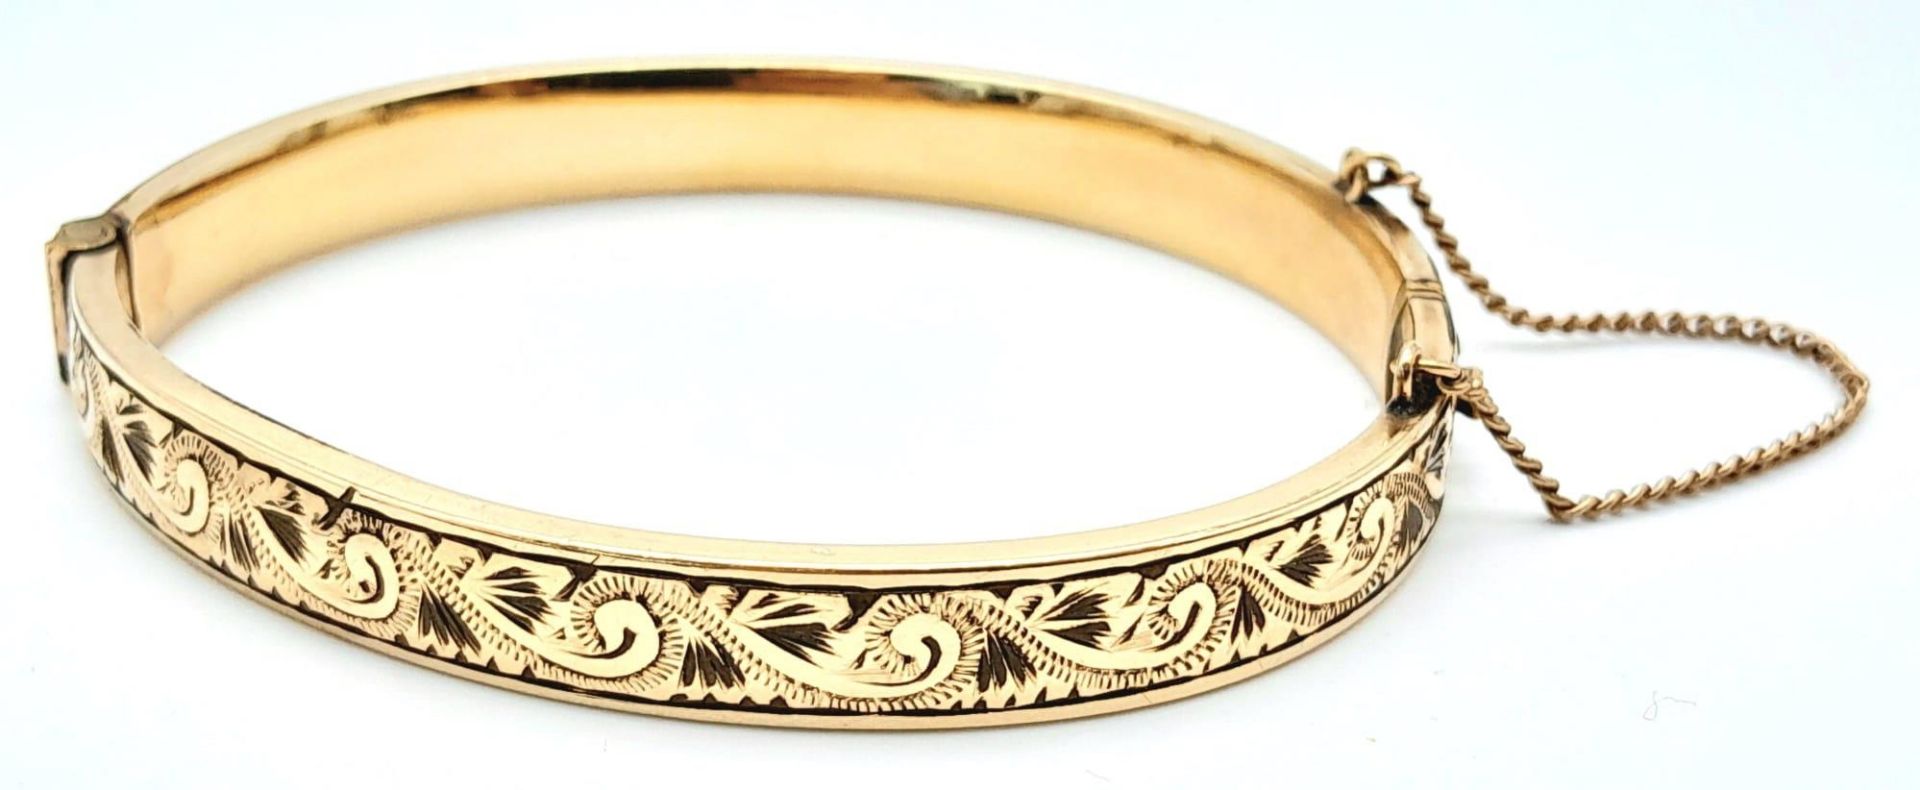 A Vintage 9K (1/5 gold plated) Decorative Bangle. 11.26g total weight. - Image 2 of 12